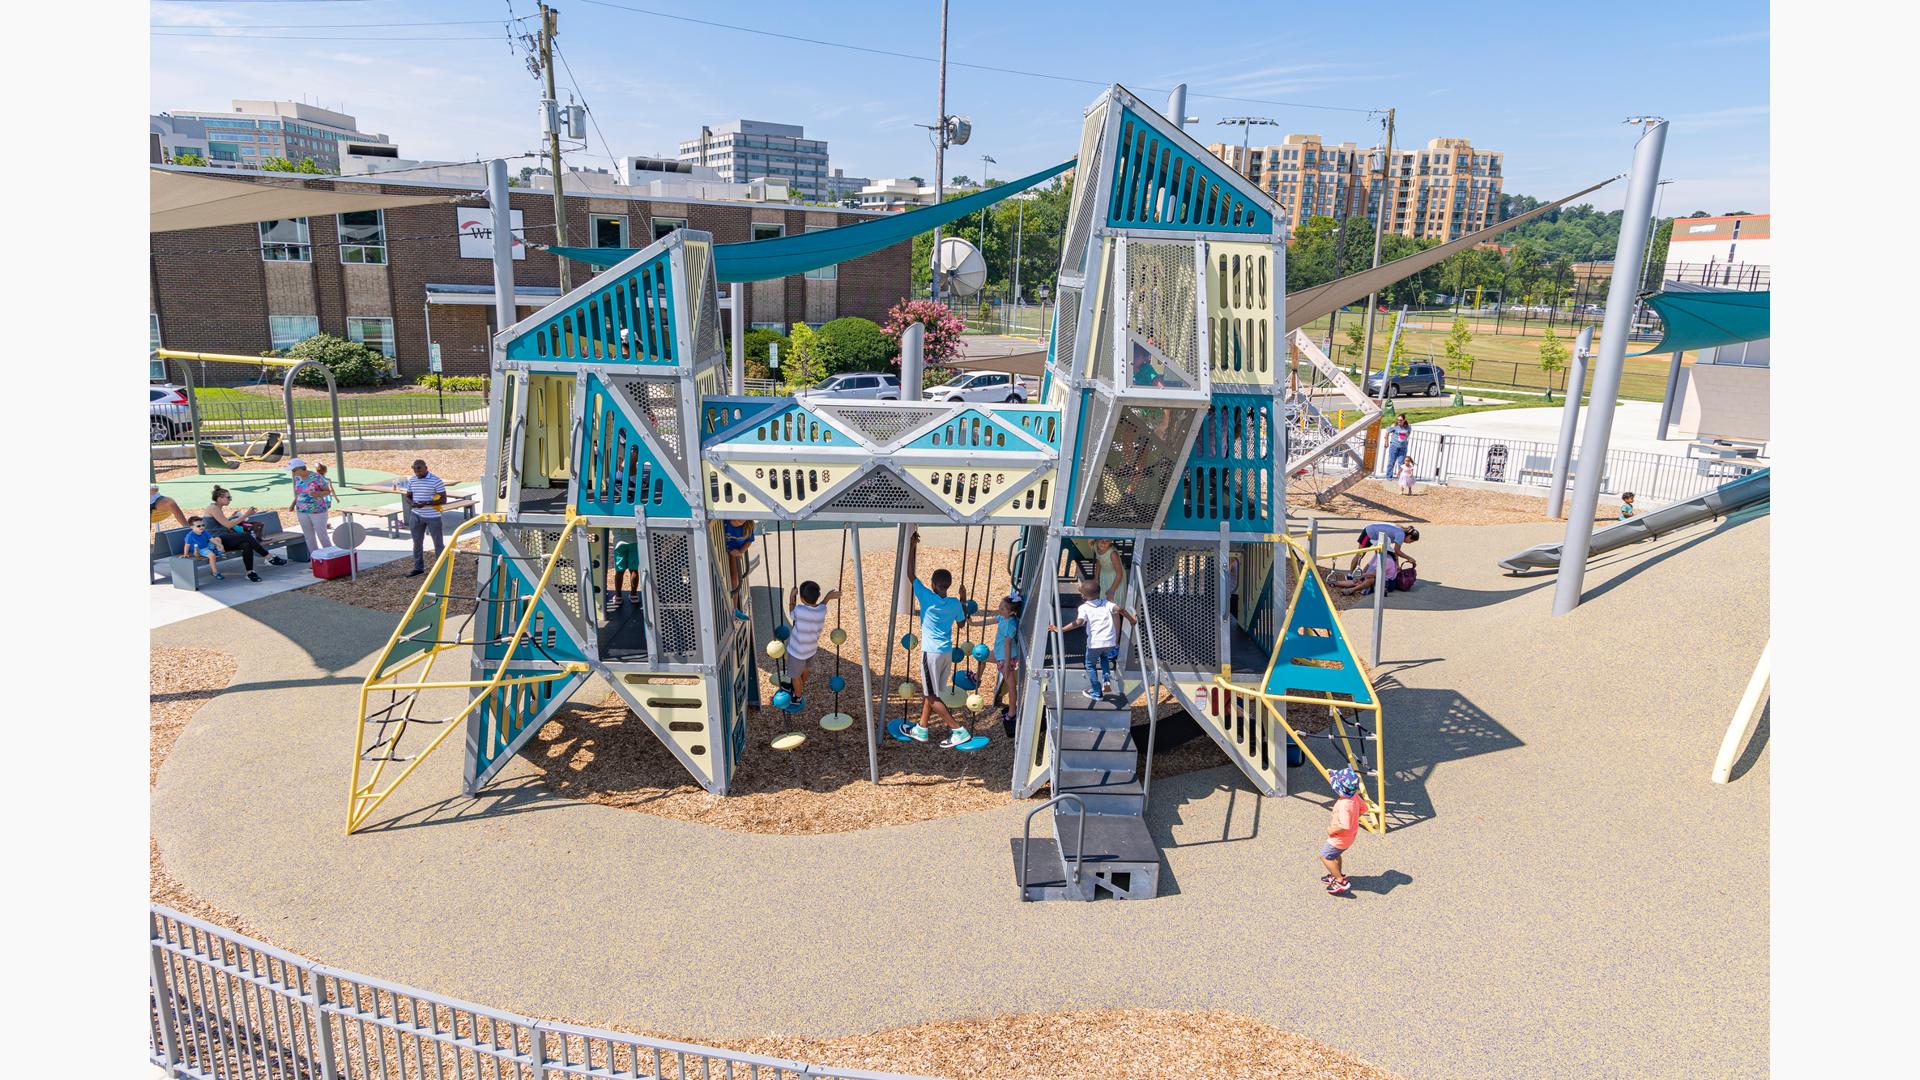 Children play on a playground of two towers with an elevated connecting crawl tunnel in an urban setting. Families sit under a large shade sail in the background to the left.